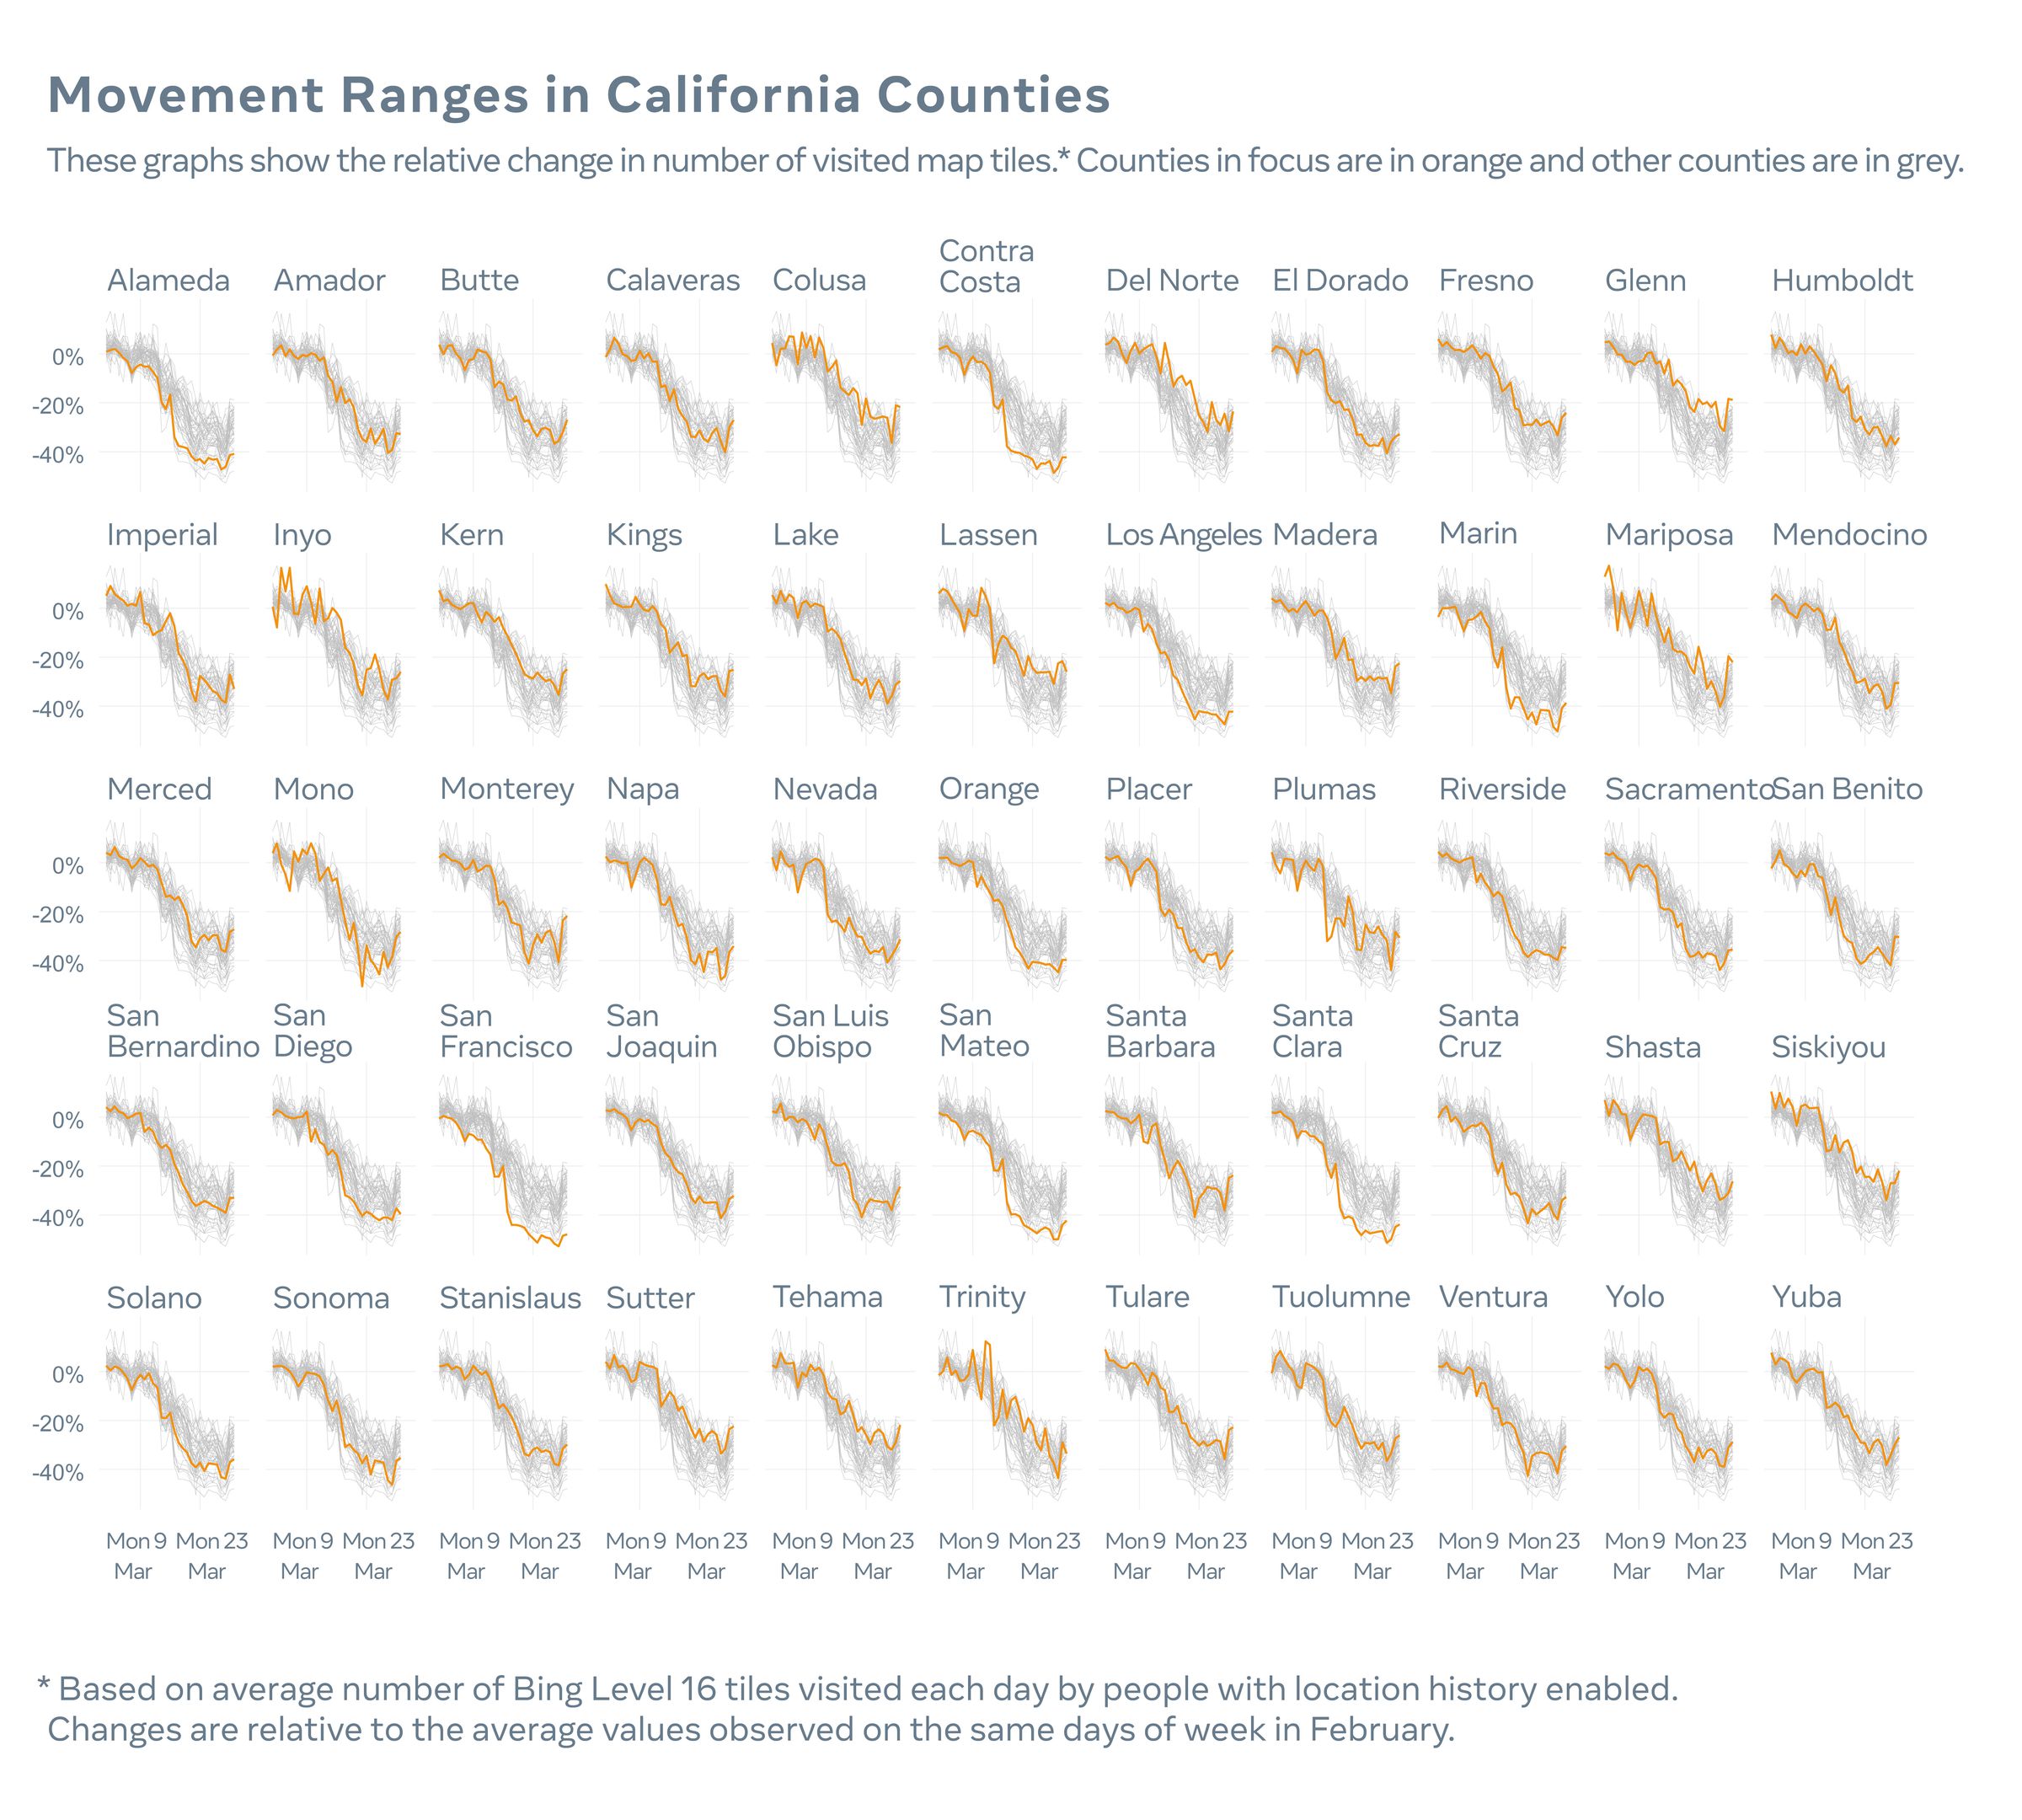 Movement ranges in California counties